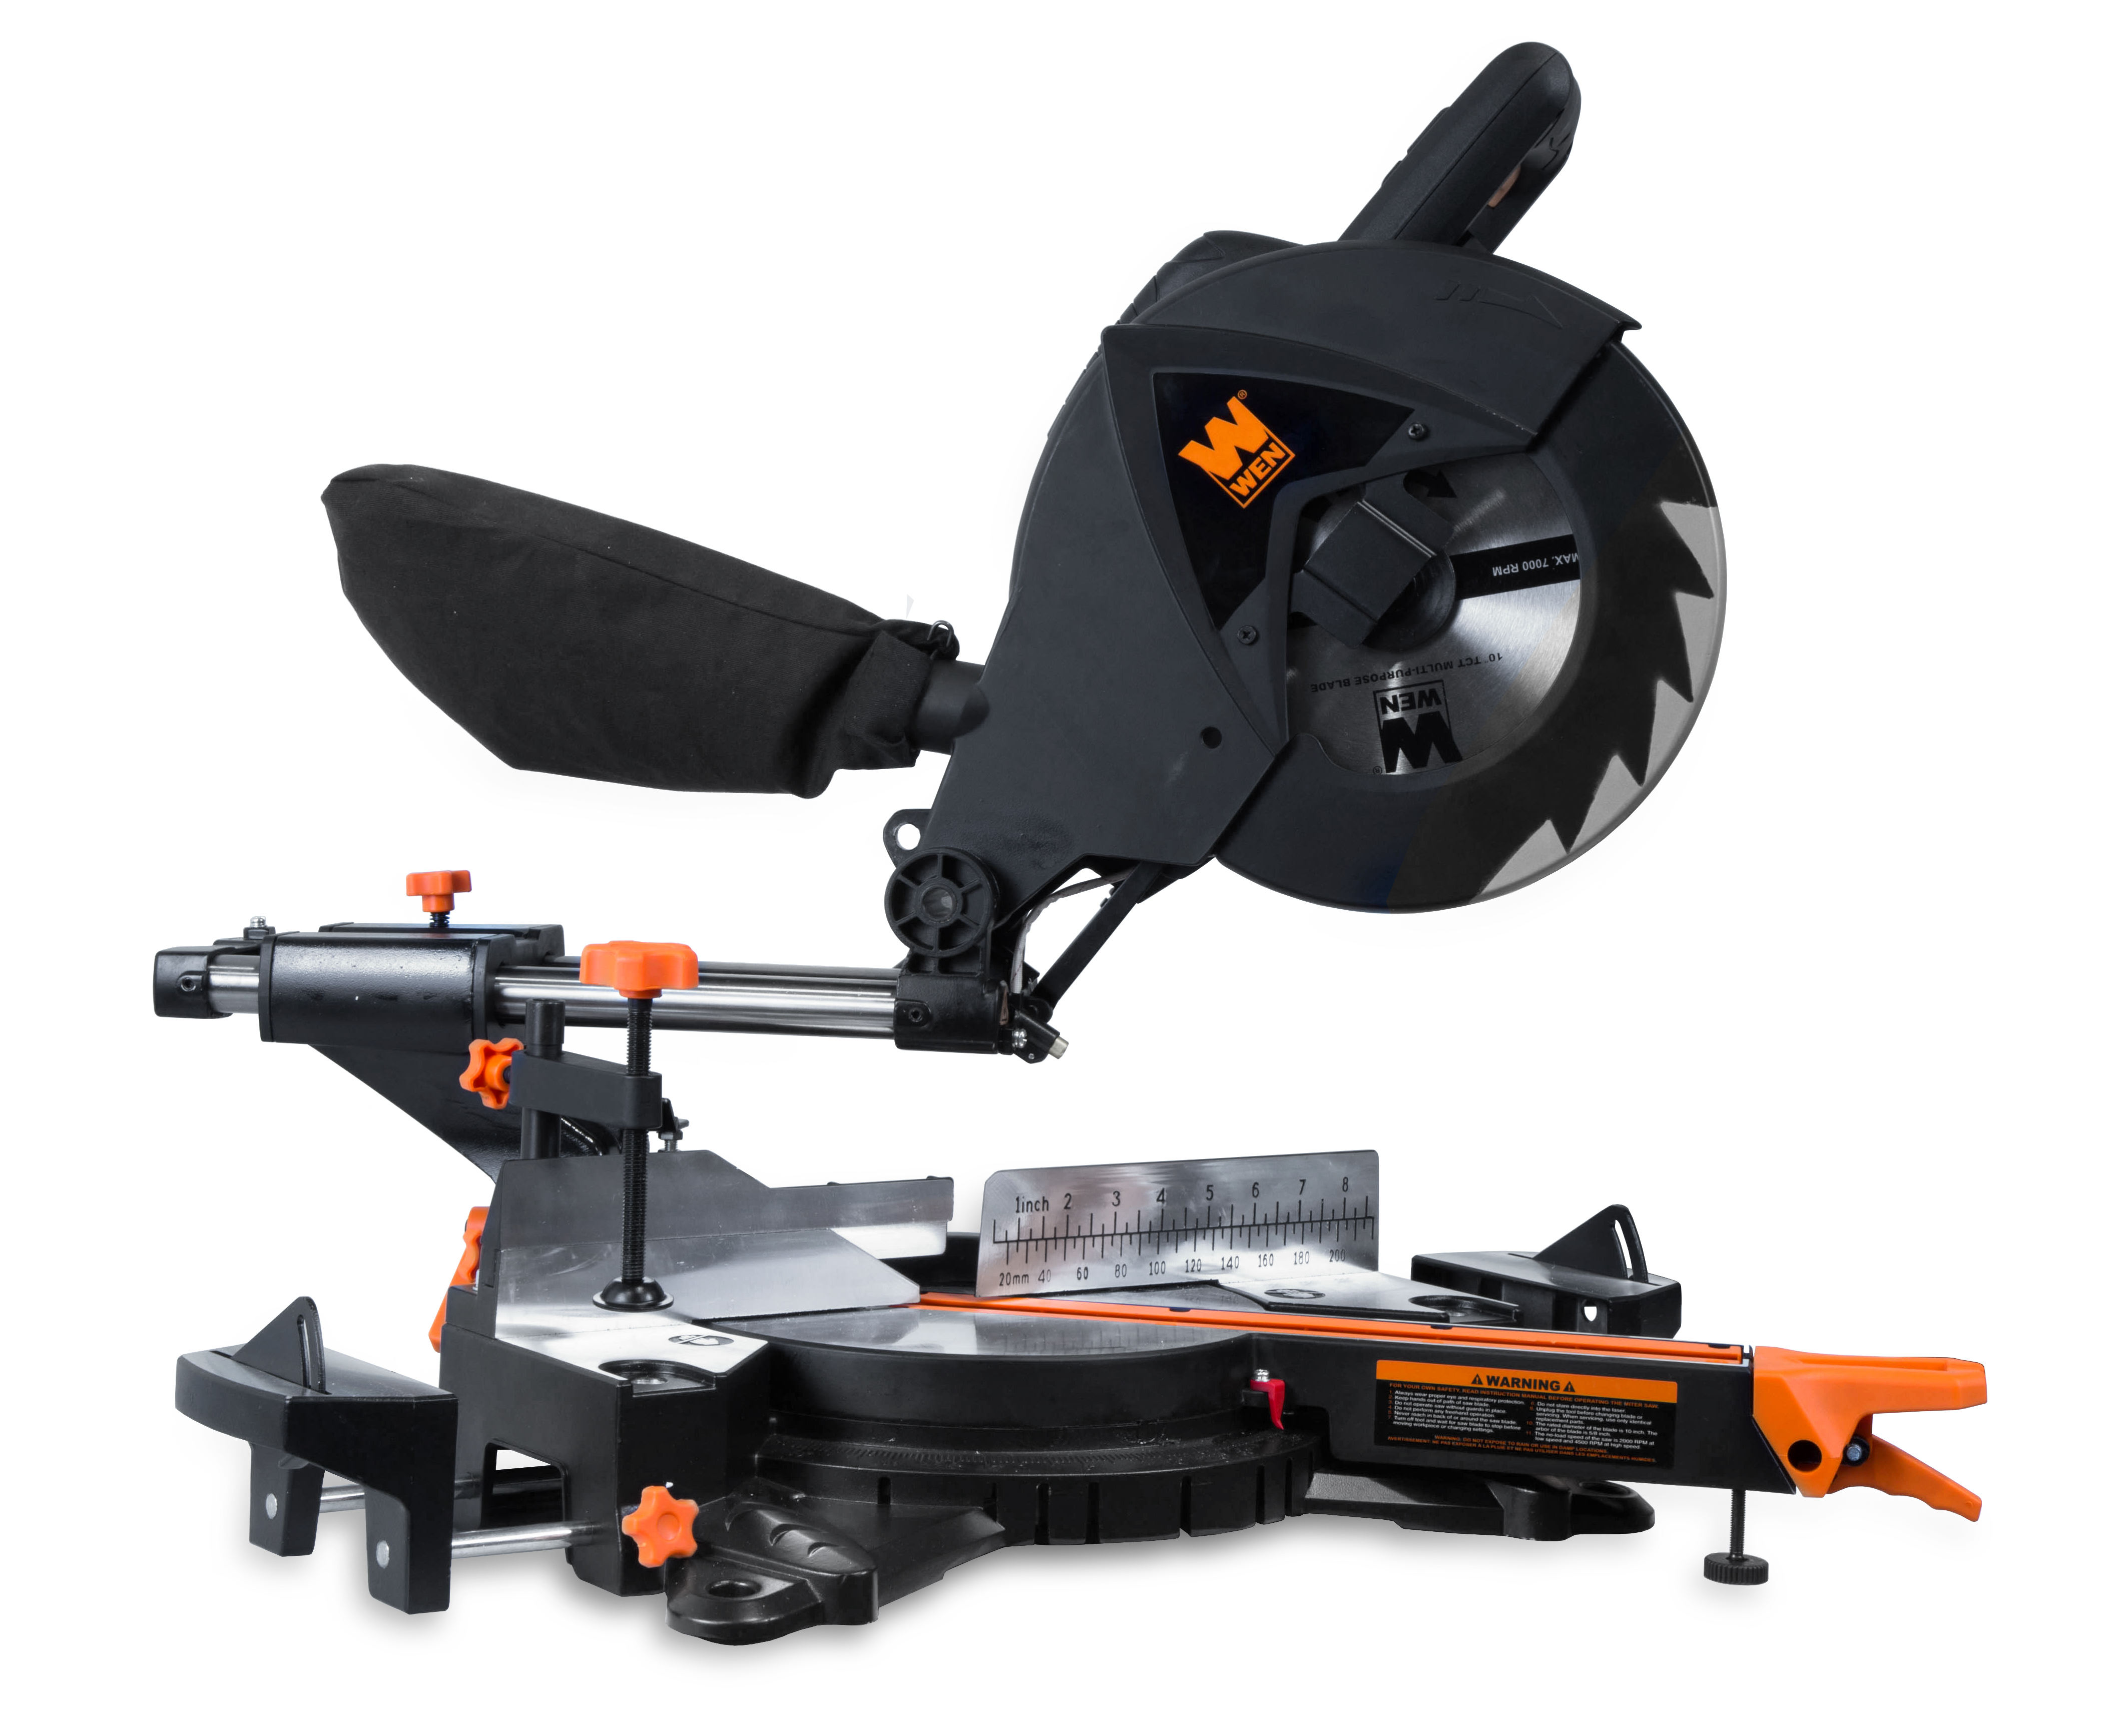 WEN 15-Amp Two-Speed Single Bevel 10-Inch Sliding Compound Miter Saw with Smart Power Technology, 70730 - image 1 of 6